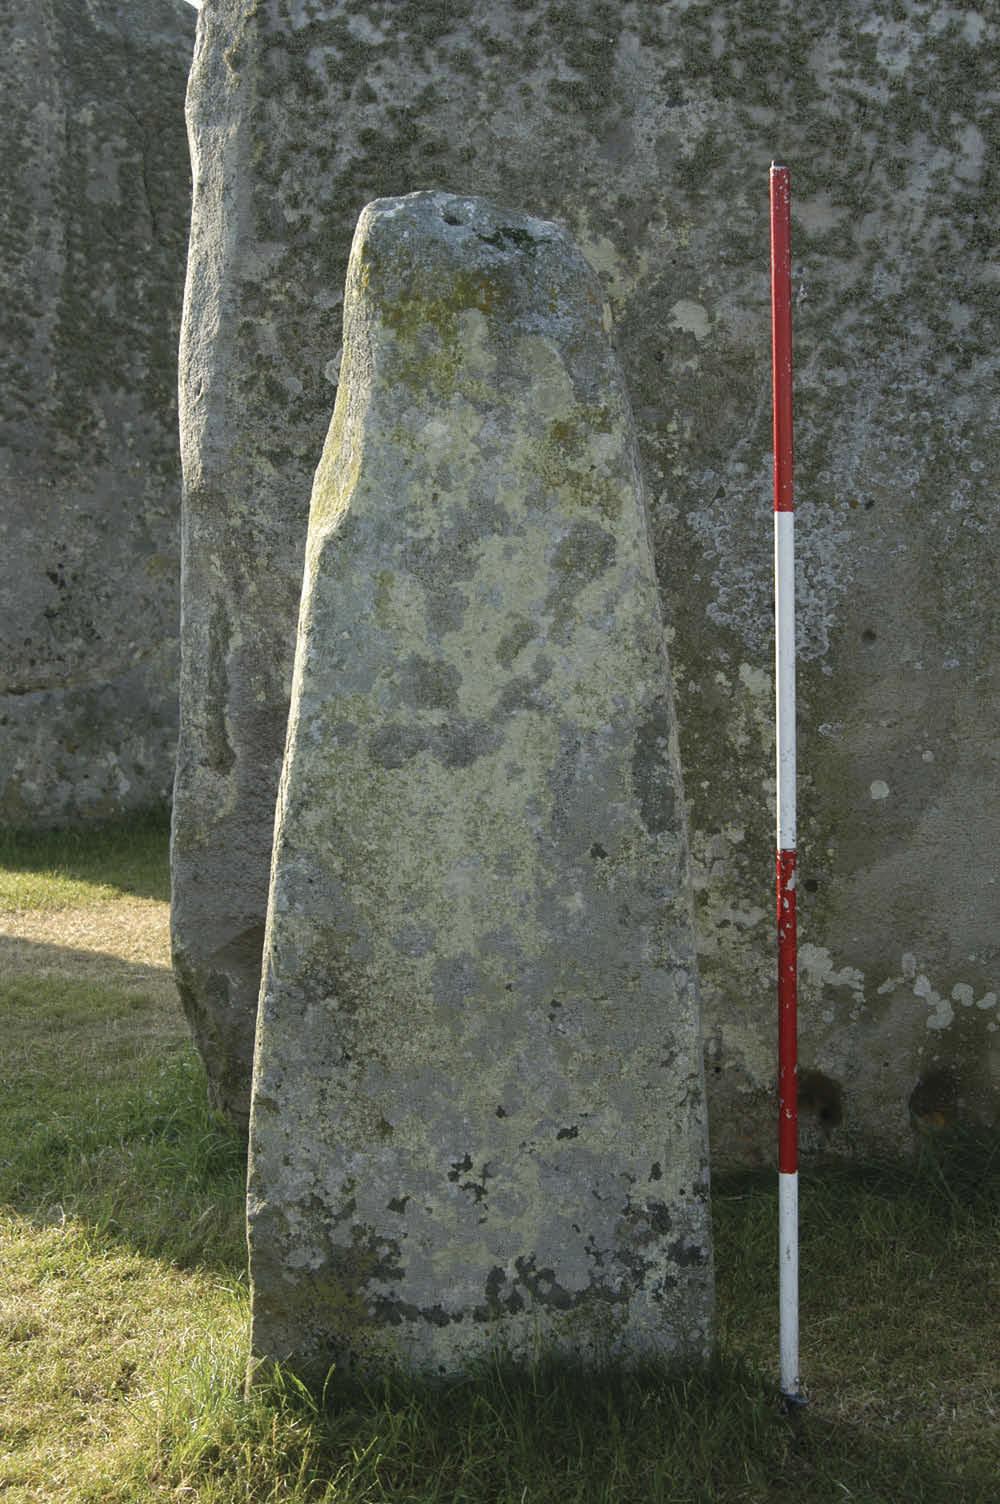 TIME & MIND 113 Figure 11. Stonehenge, Wiltshire. Stone 70 in the Bluestone Oval. Shaped like an axehead blade-down in the ground, or a human head and torso? Scale totals 2m.